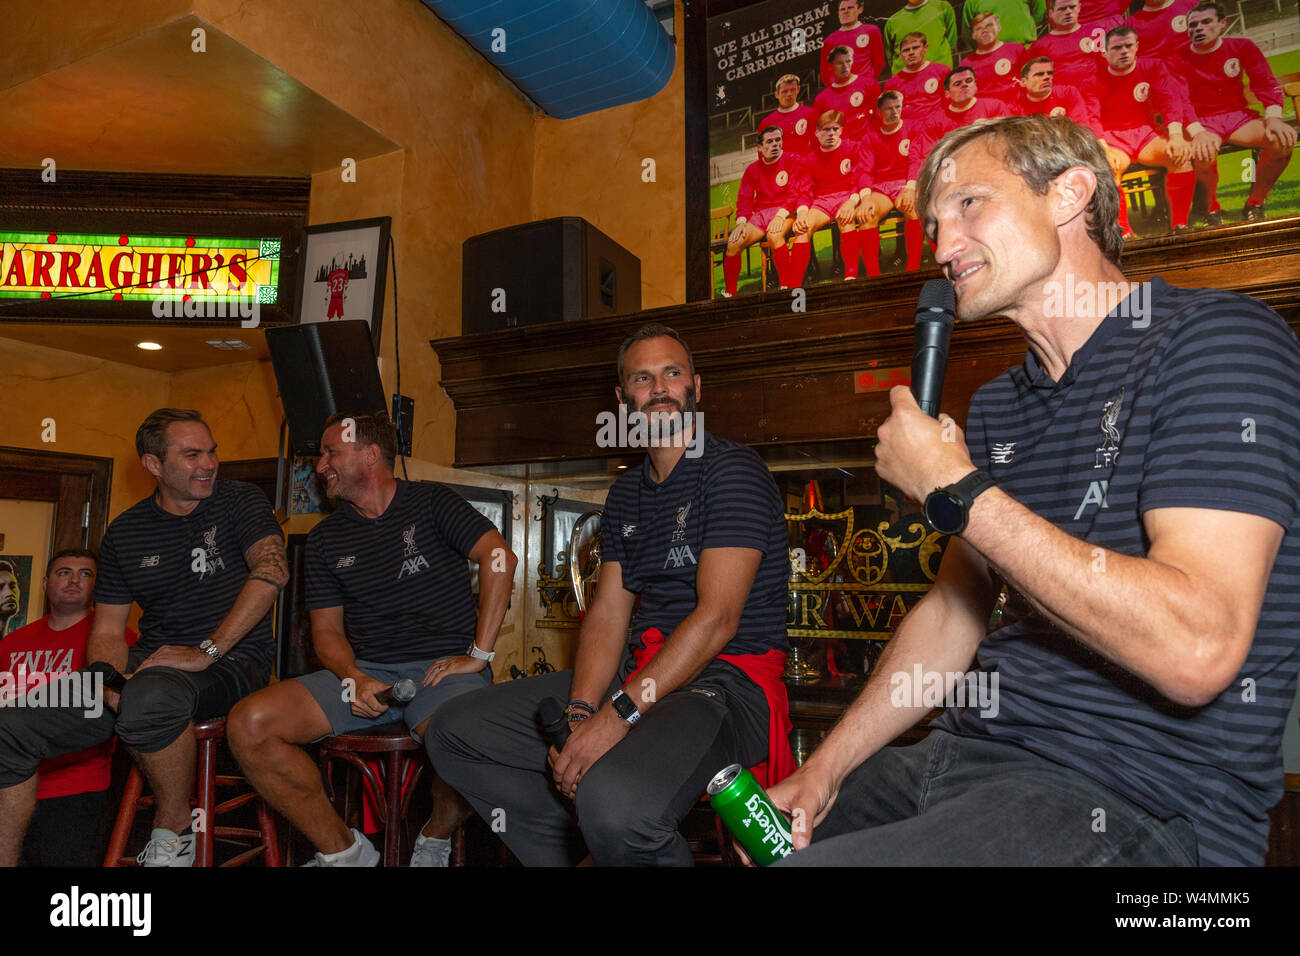 New York, NY - July 23, 2019: Liverpool legends Jason McAteer, Vladi Smicer, Patrik Berger and Sami Hyypia  attend Liverpool FC Fan Event at Carragher’s Bar Stock Photo